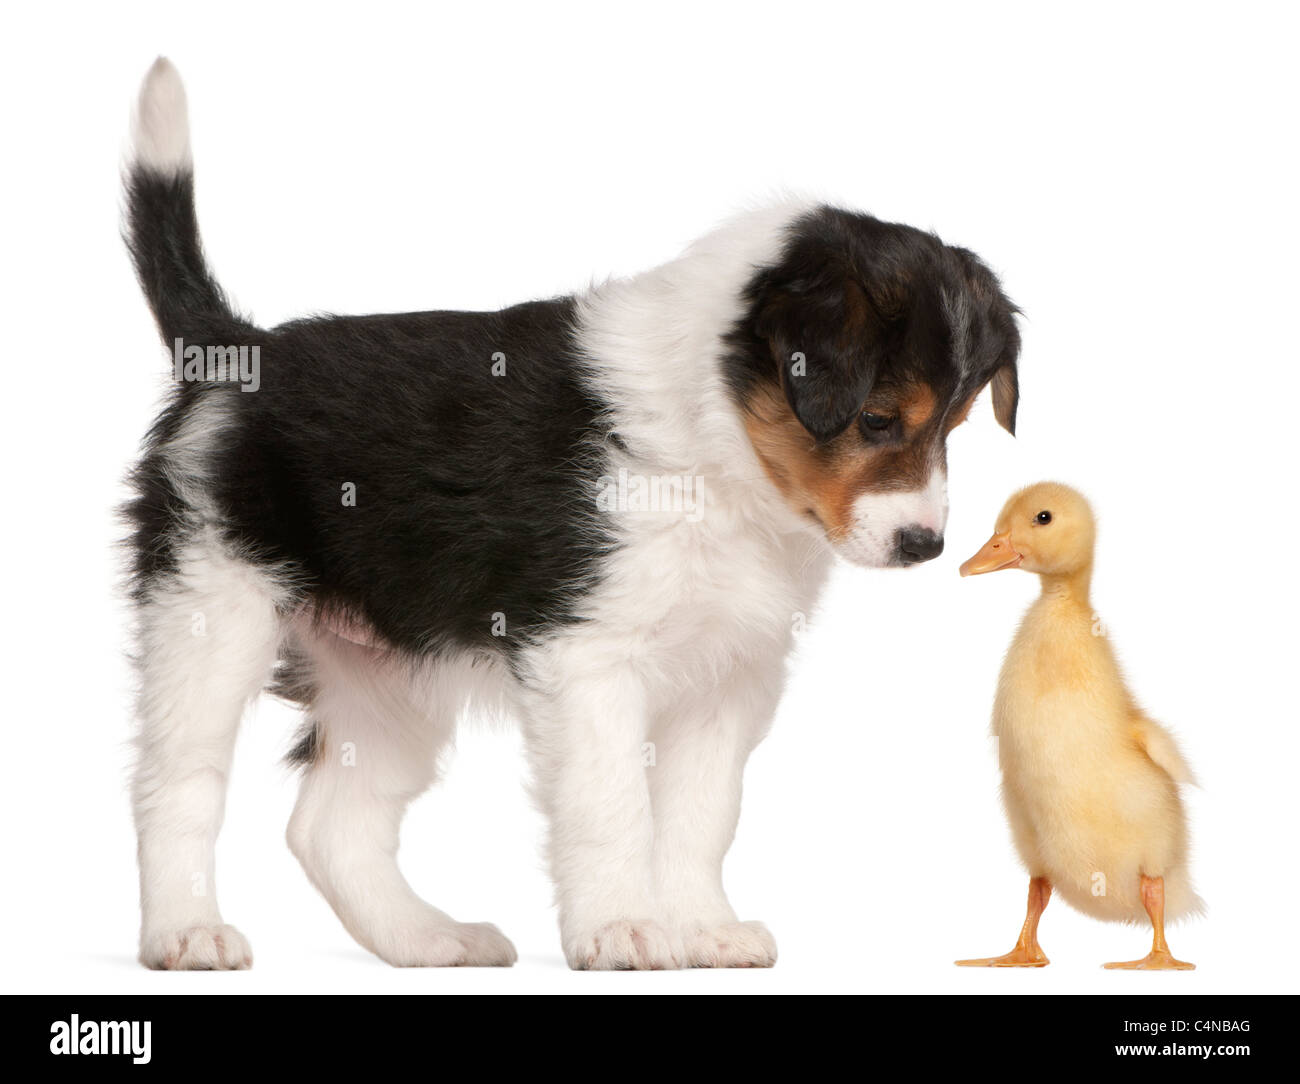 Border Collie puppy, 6 weeks old, playing with a duckling, 1 week old, in front of white background Stock Photo